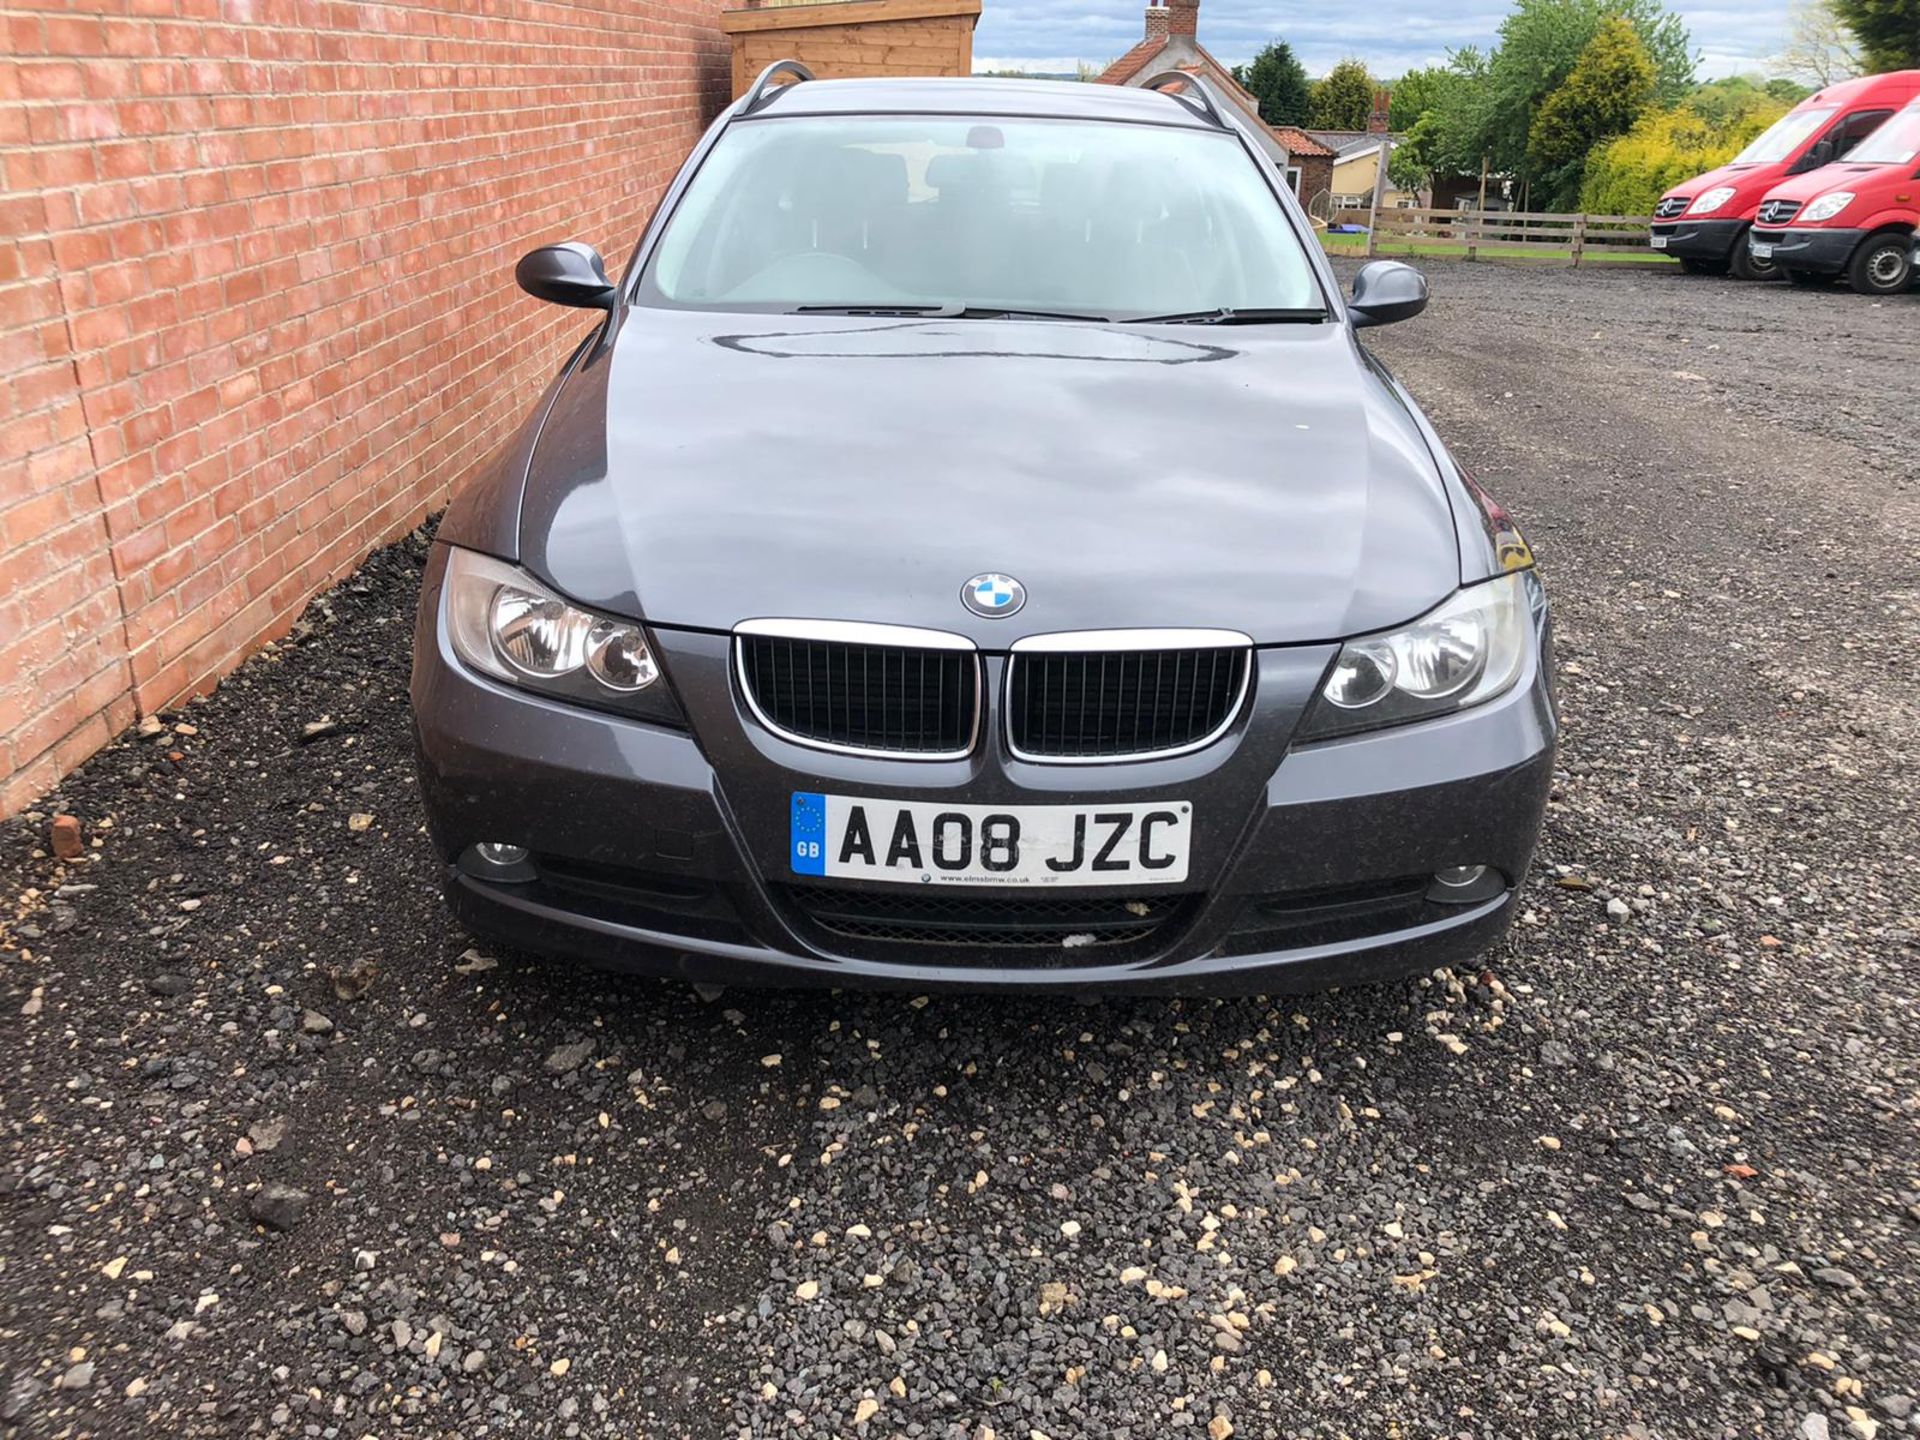 2008 BMW 318D EDITION ES TOURING GREY ESTATE, 2.0 DIESEL ENGINE, 6 PREVIOUS KEEPERS *NO VAT* - Image 3 of 11